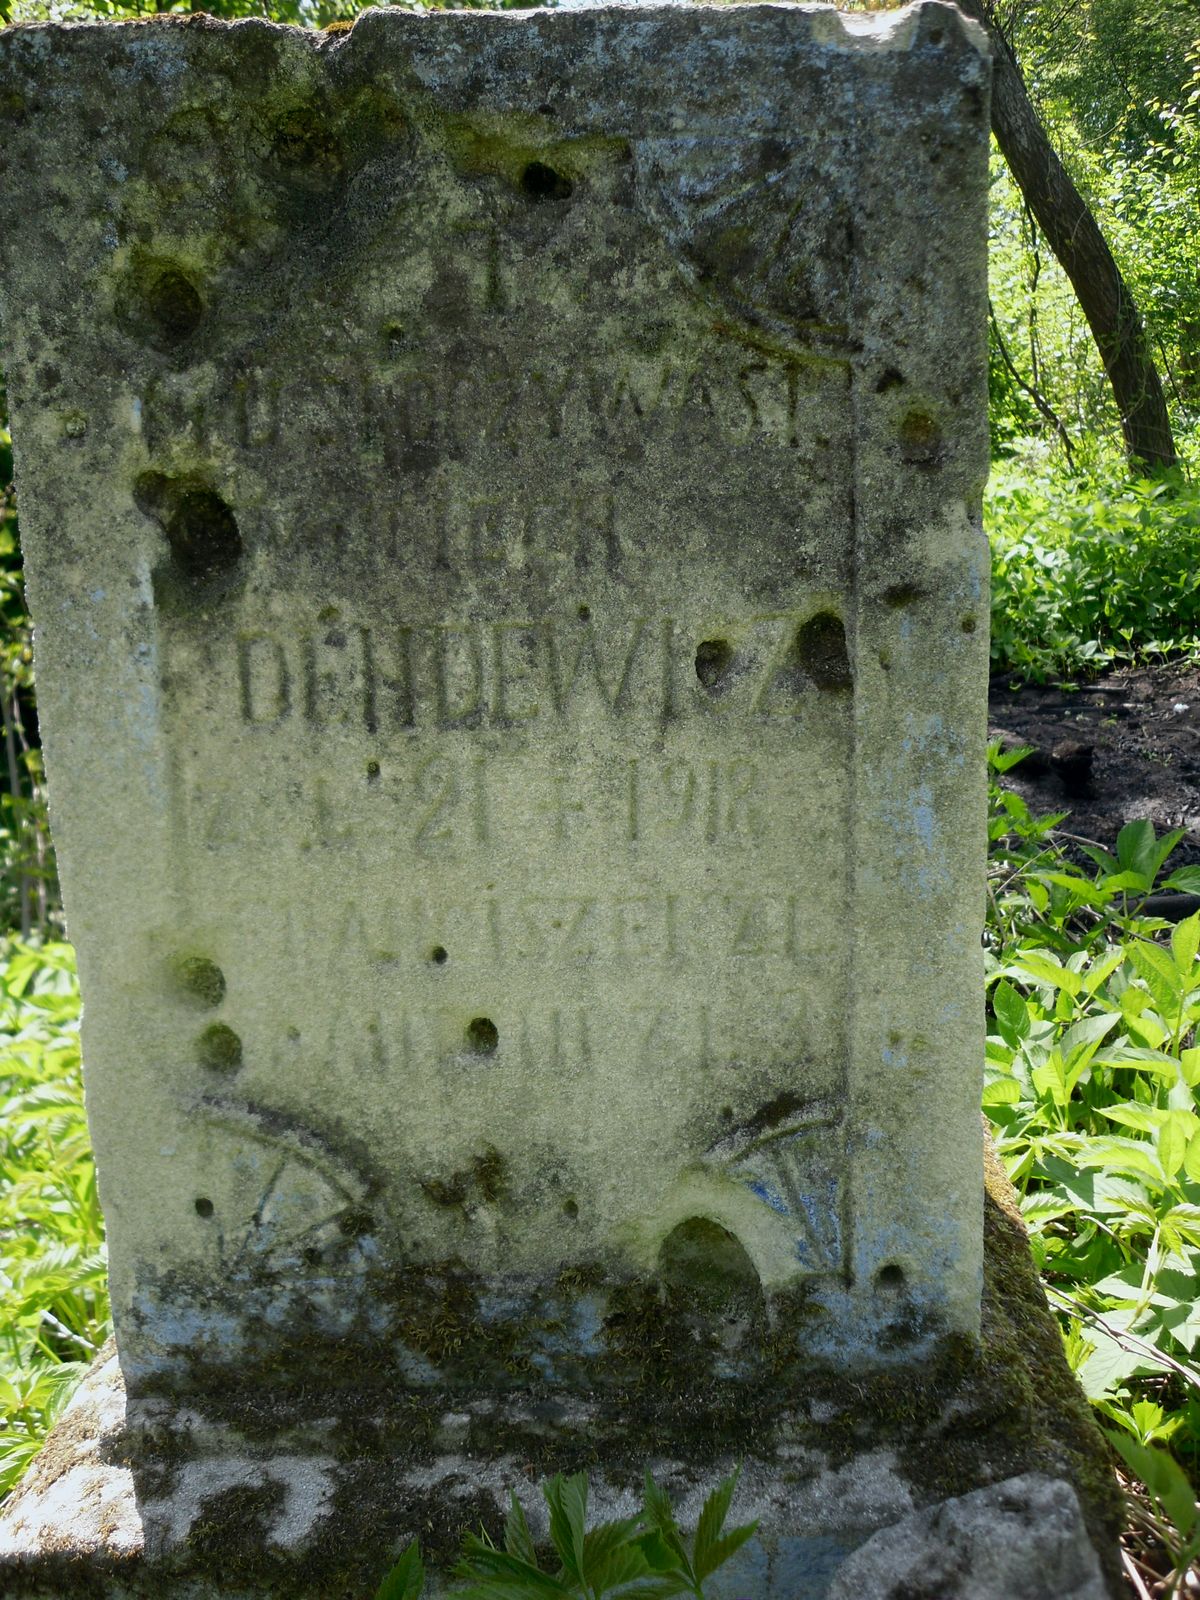 Inscription from the tombstone of the Dendewicz family, Kozlowo cemetery